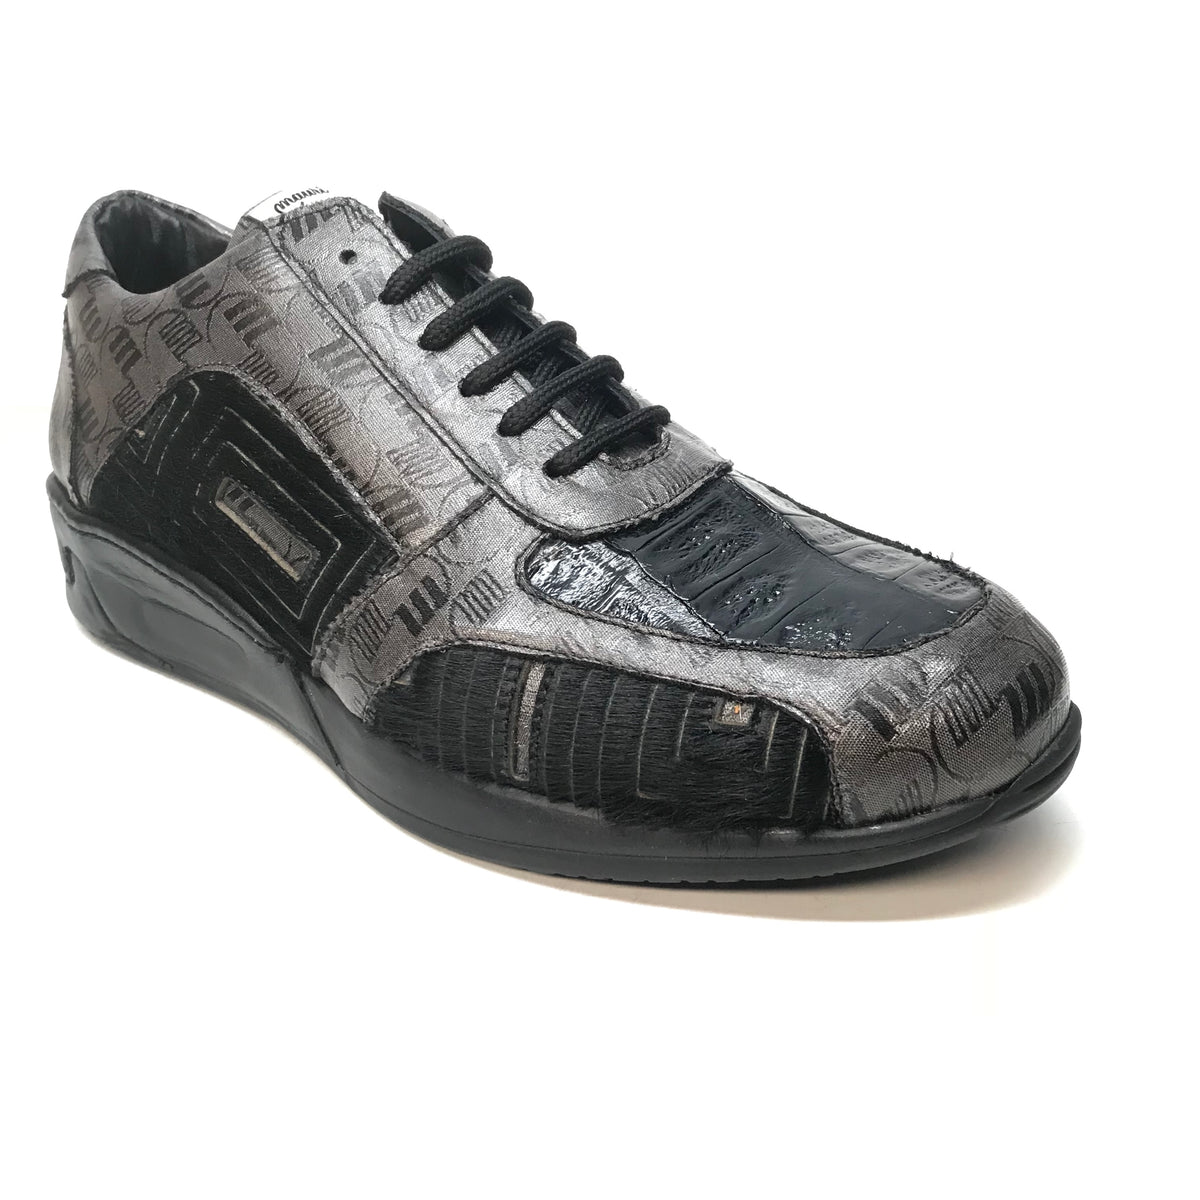 Mauri 8587 Charcoal Pony Baby Crocodile Sneakers - Dudes Boutique